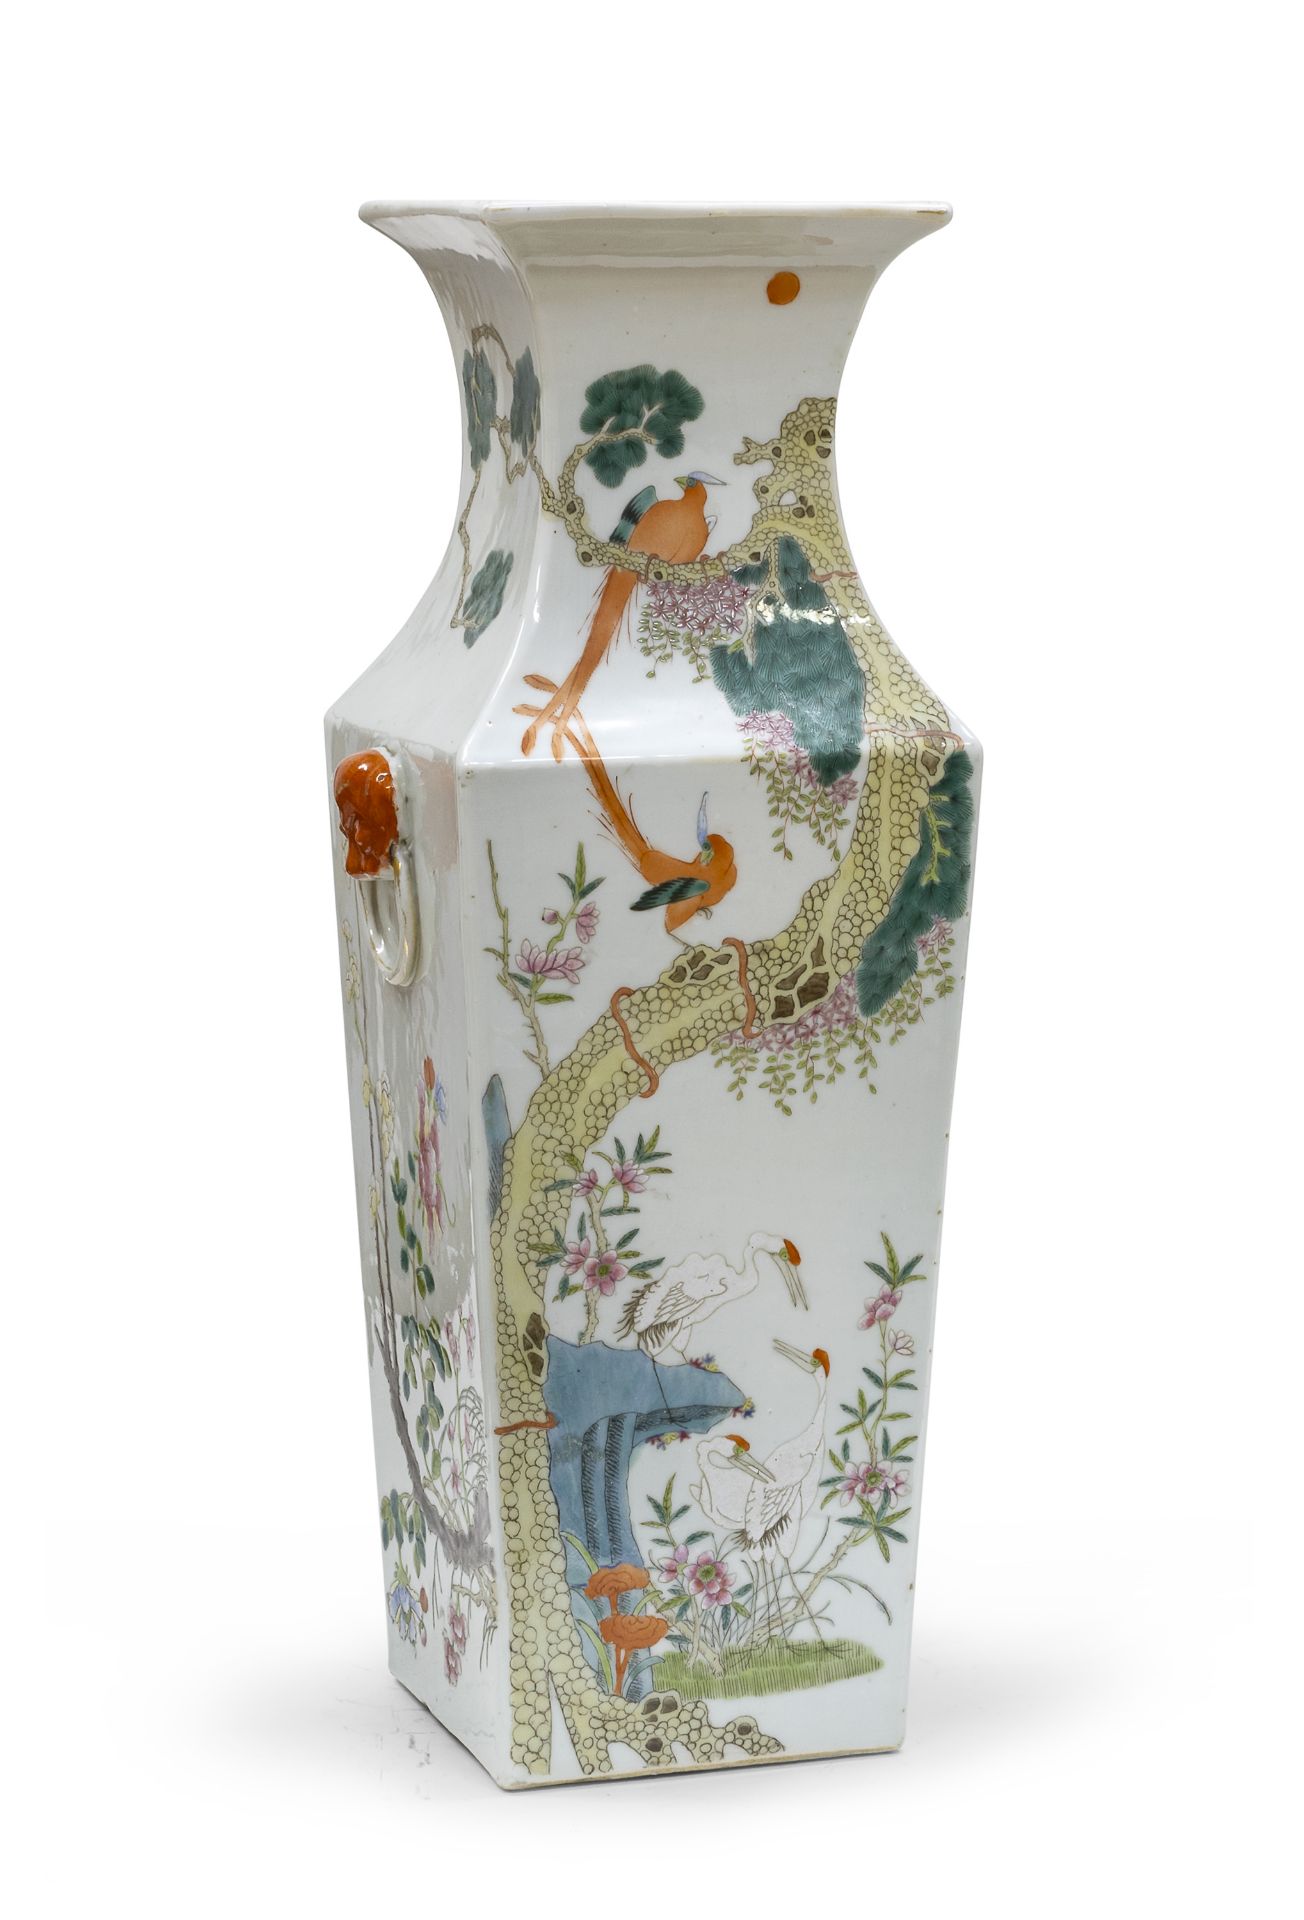 A CHINESE POLYCHROME ENAMELED PORCELAIN VASE FIRST HALF 20TH CENTURY.